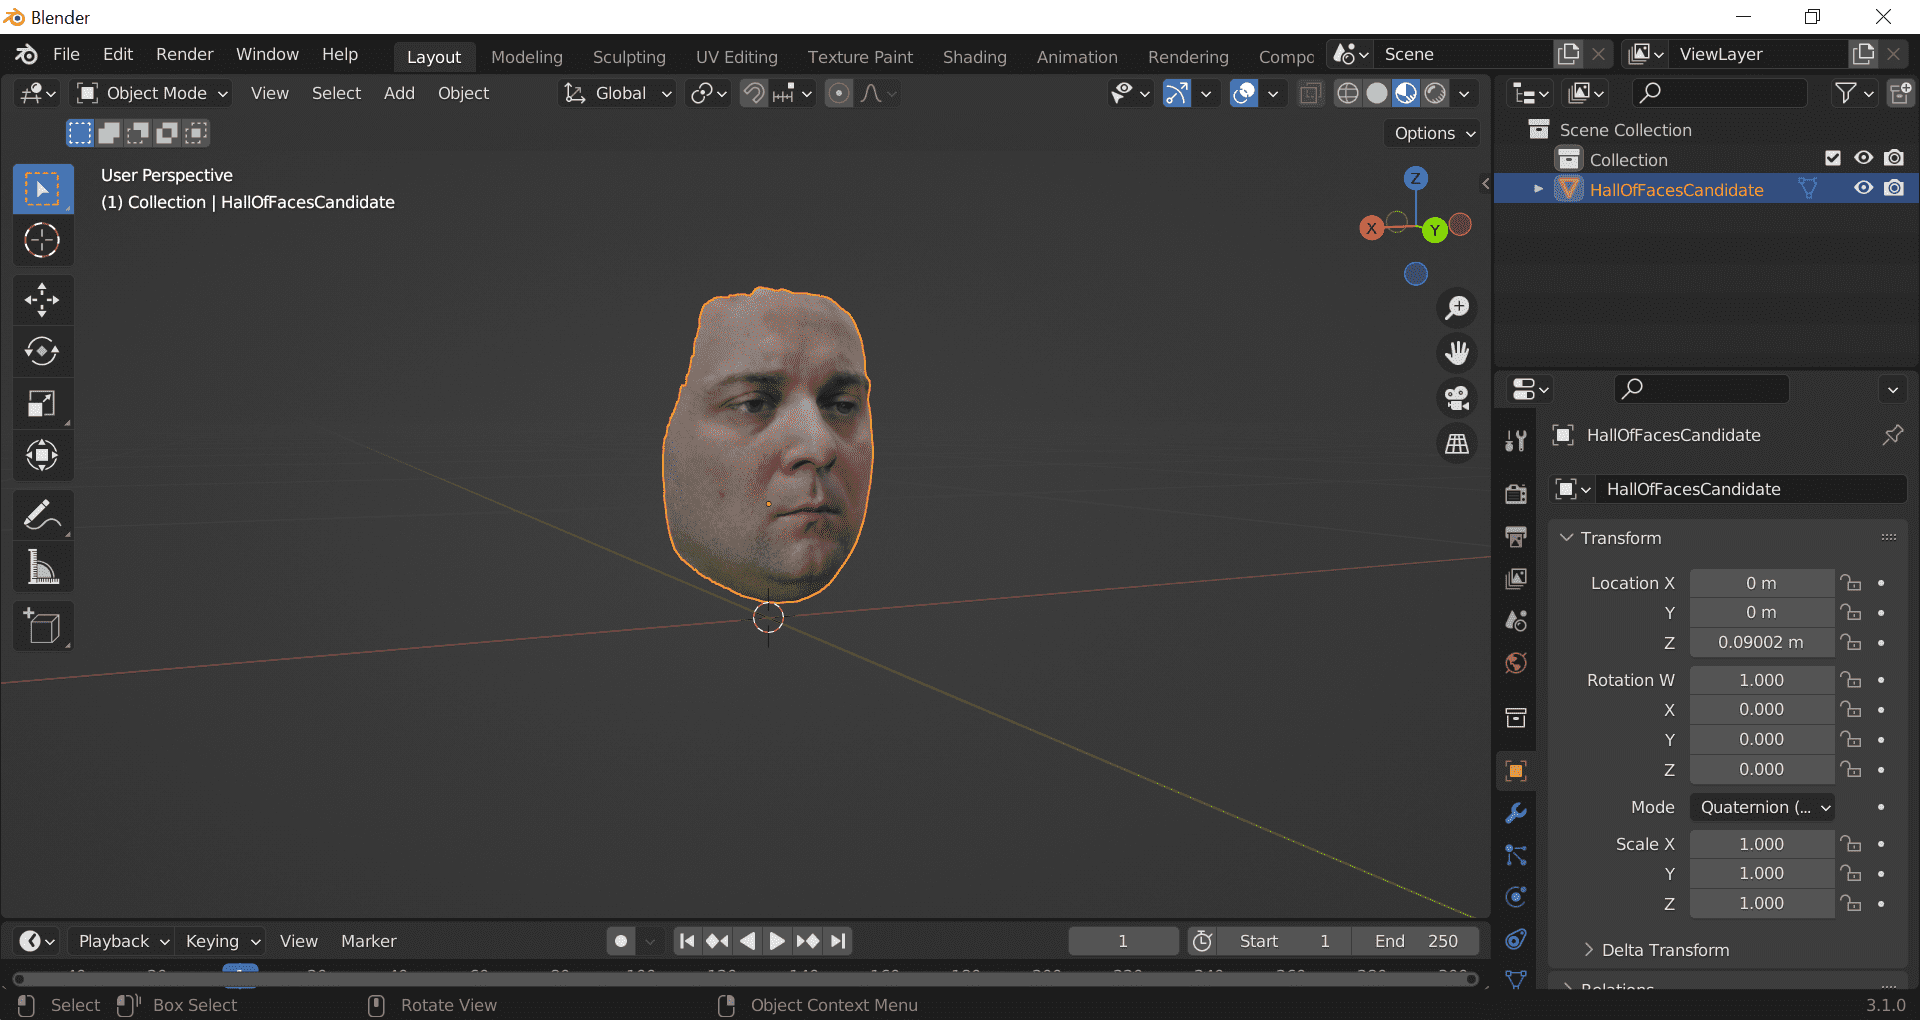 Photo from Blender software picturing an end result of a 3D scan cleanup. The only part remaining is the face, which looks like a mask suspended in space.